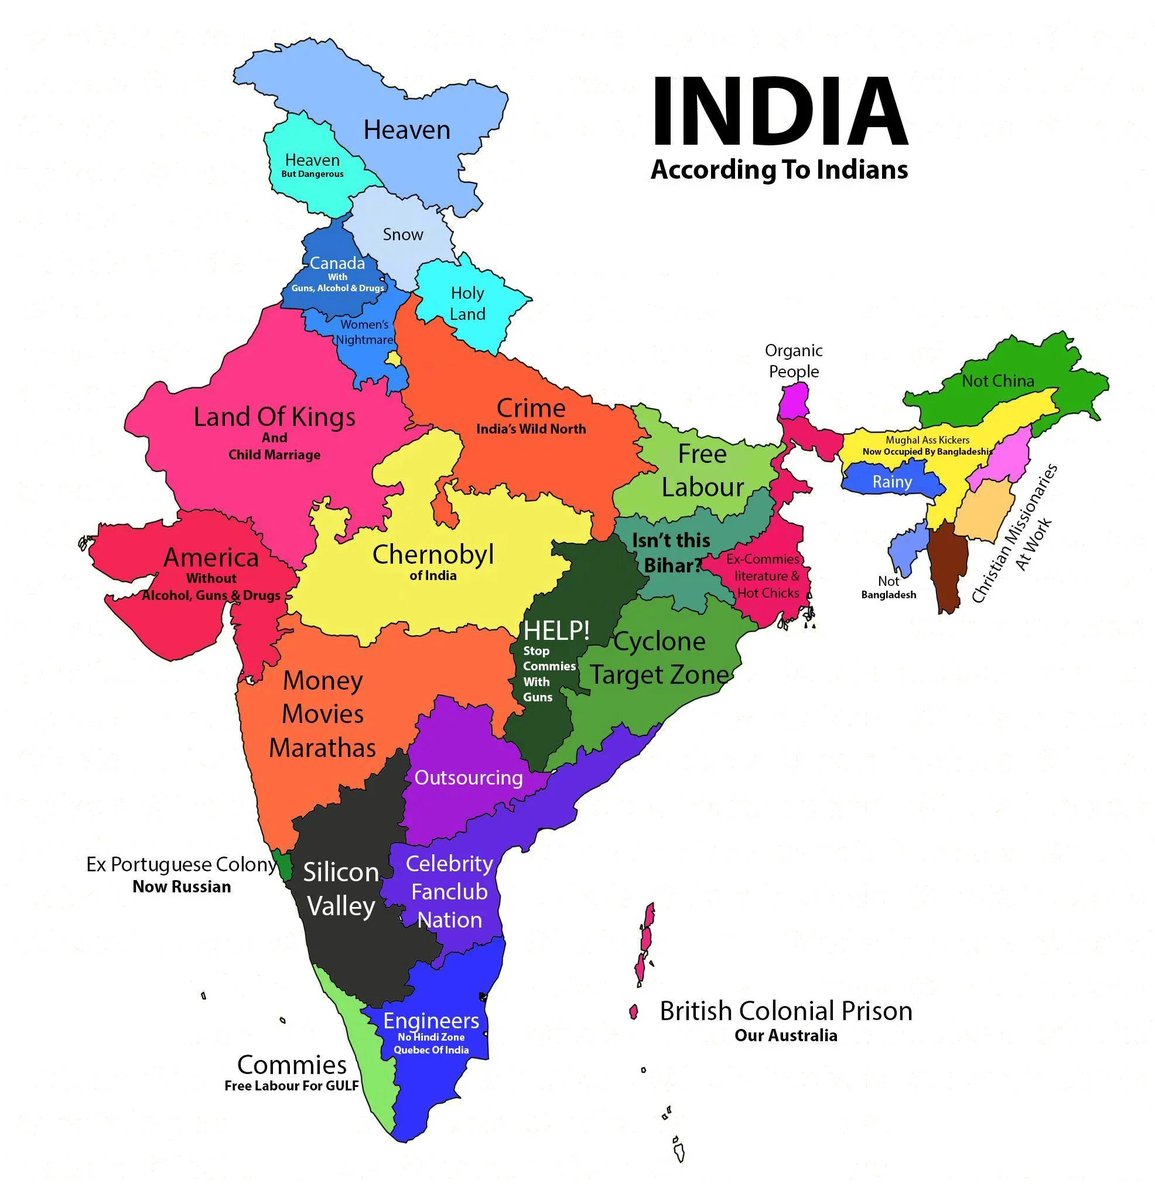 Indian states according to Indians 👀